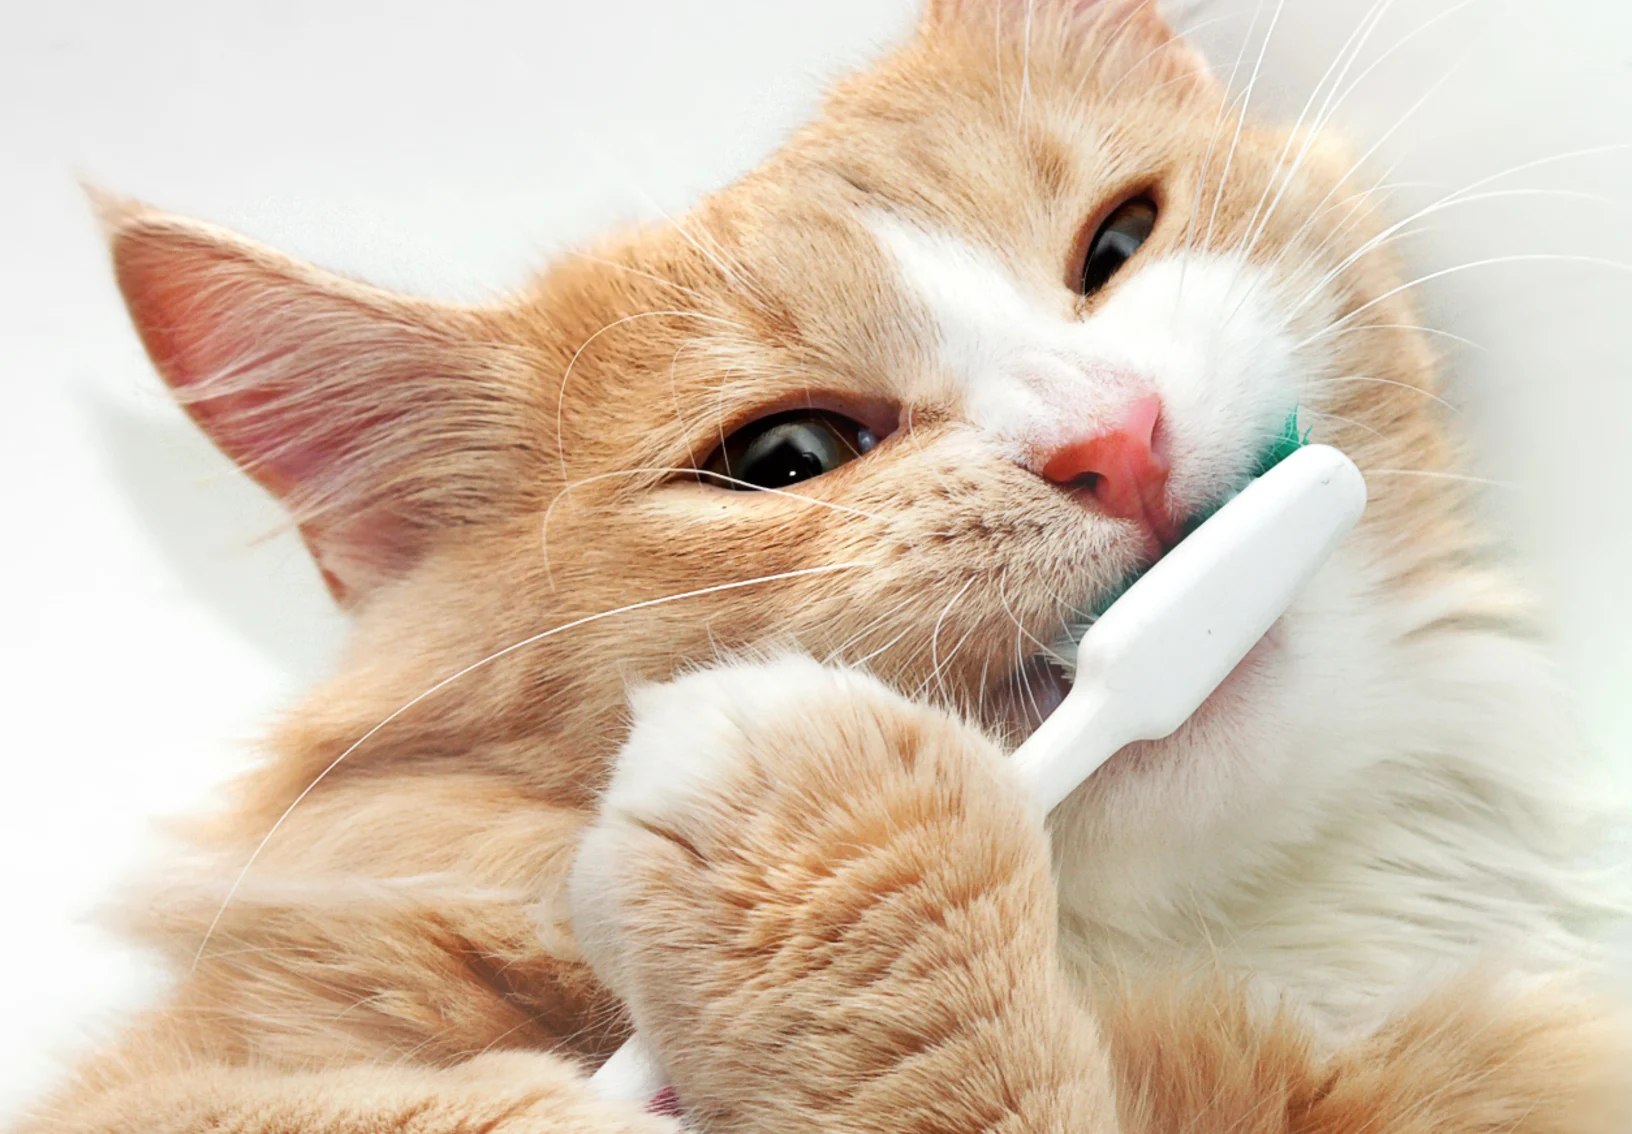 Cat with a Toothbrush